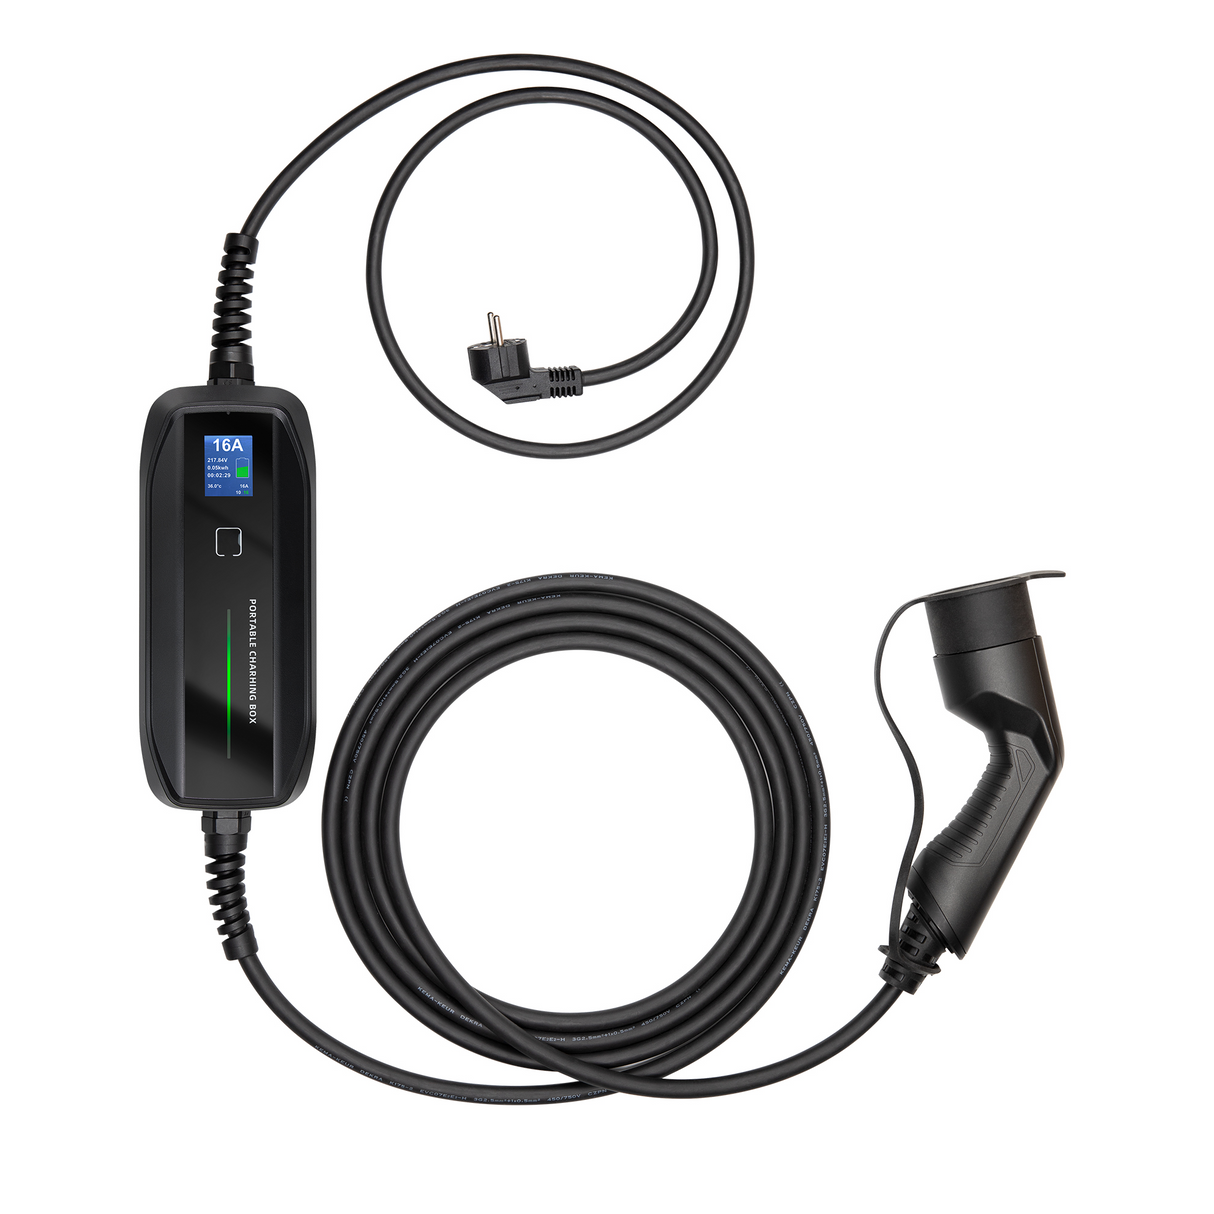 Mobile Charger Seres 3 - LCD Black Type 2 to Schuko